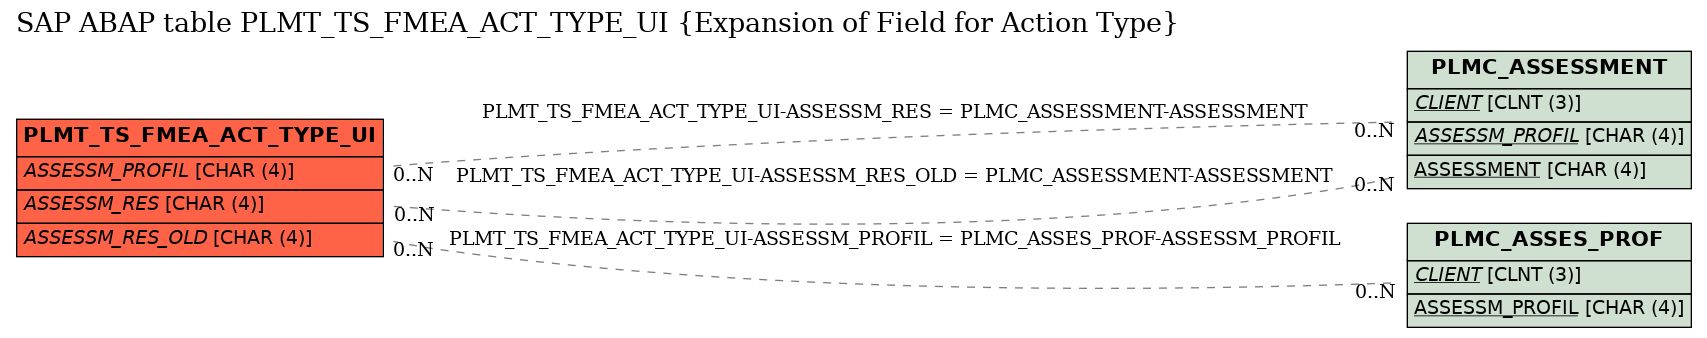 E-R Diagram for table PLMT_TS_FMEA_ACT_TYPE_UI (Expansion of Field for Action Type)